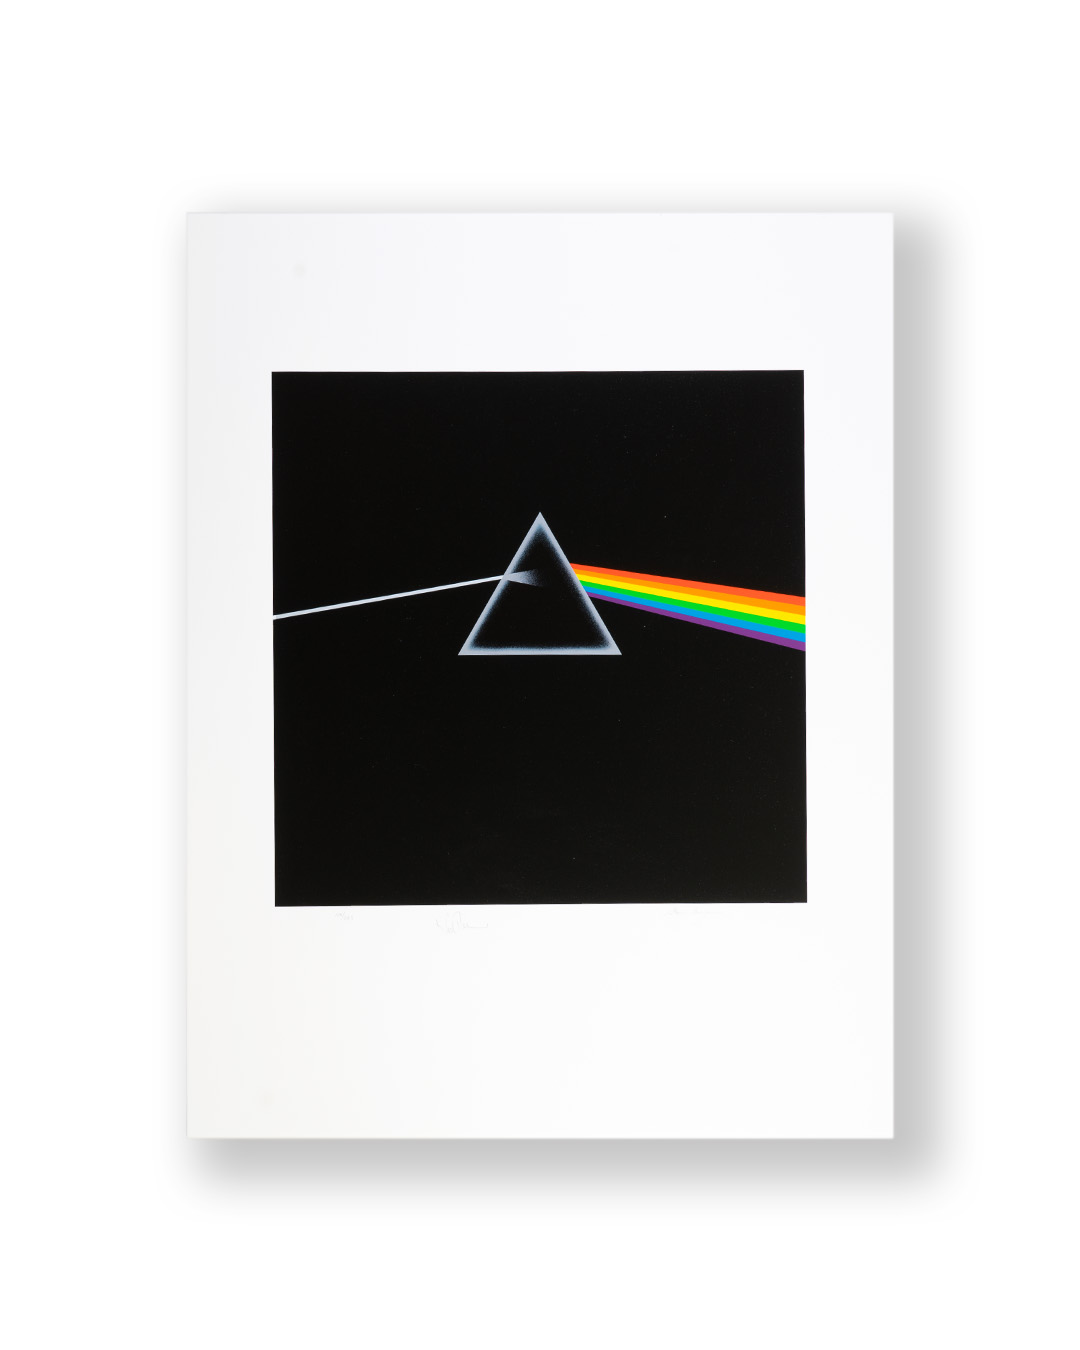 Dark Side Of The Moon - Limited Edition Prints. From £120 to